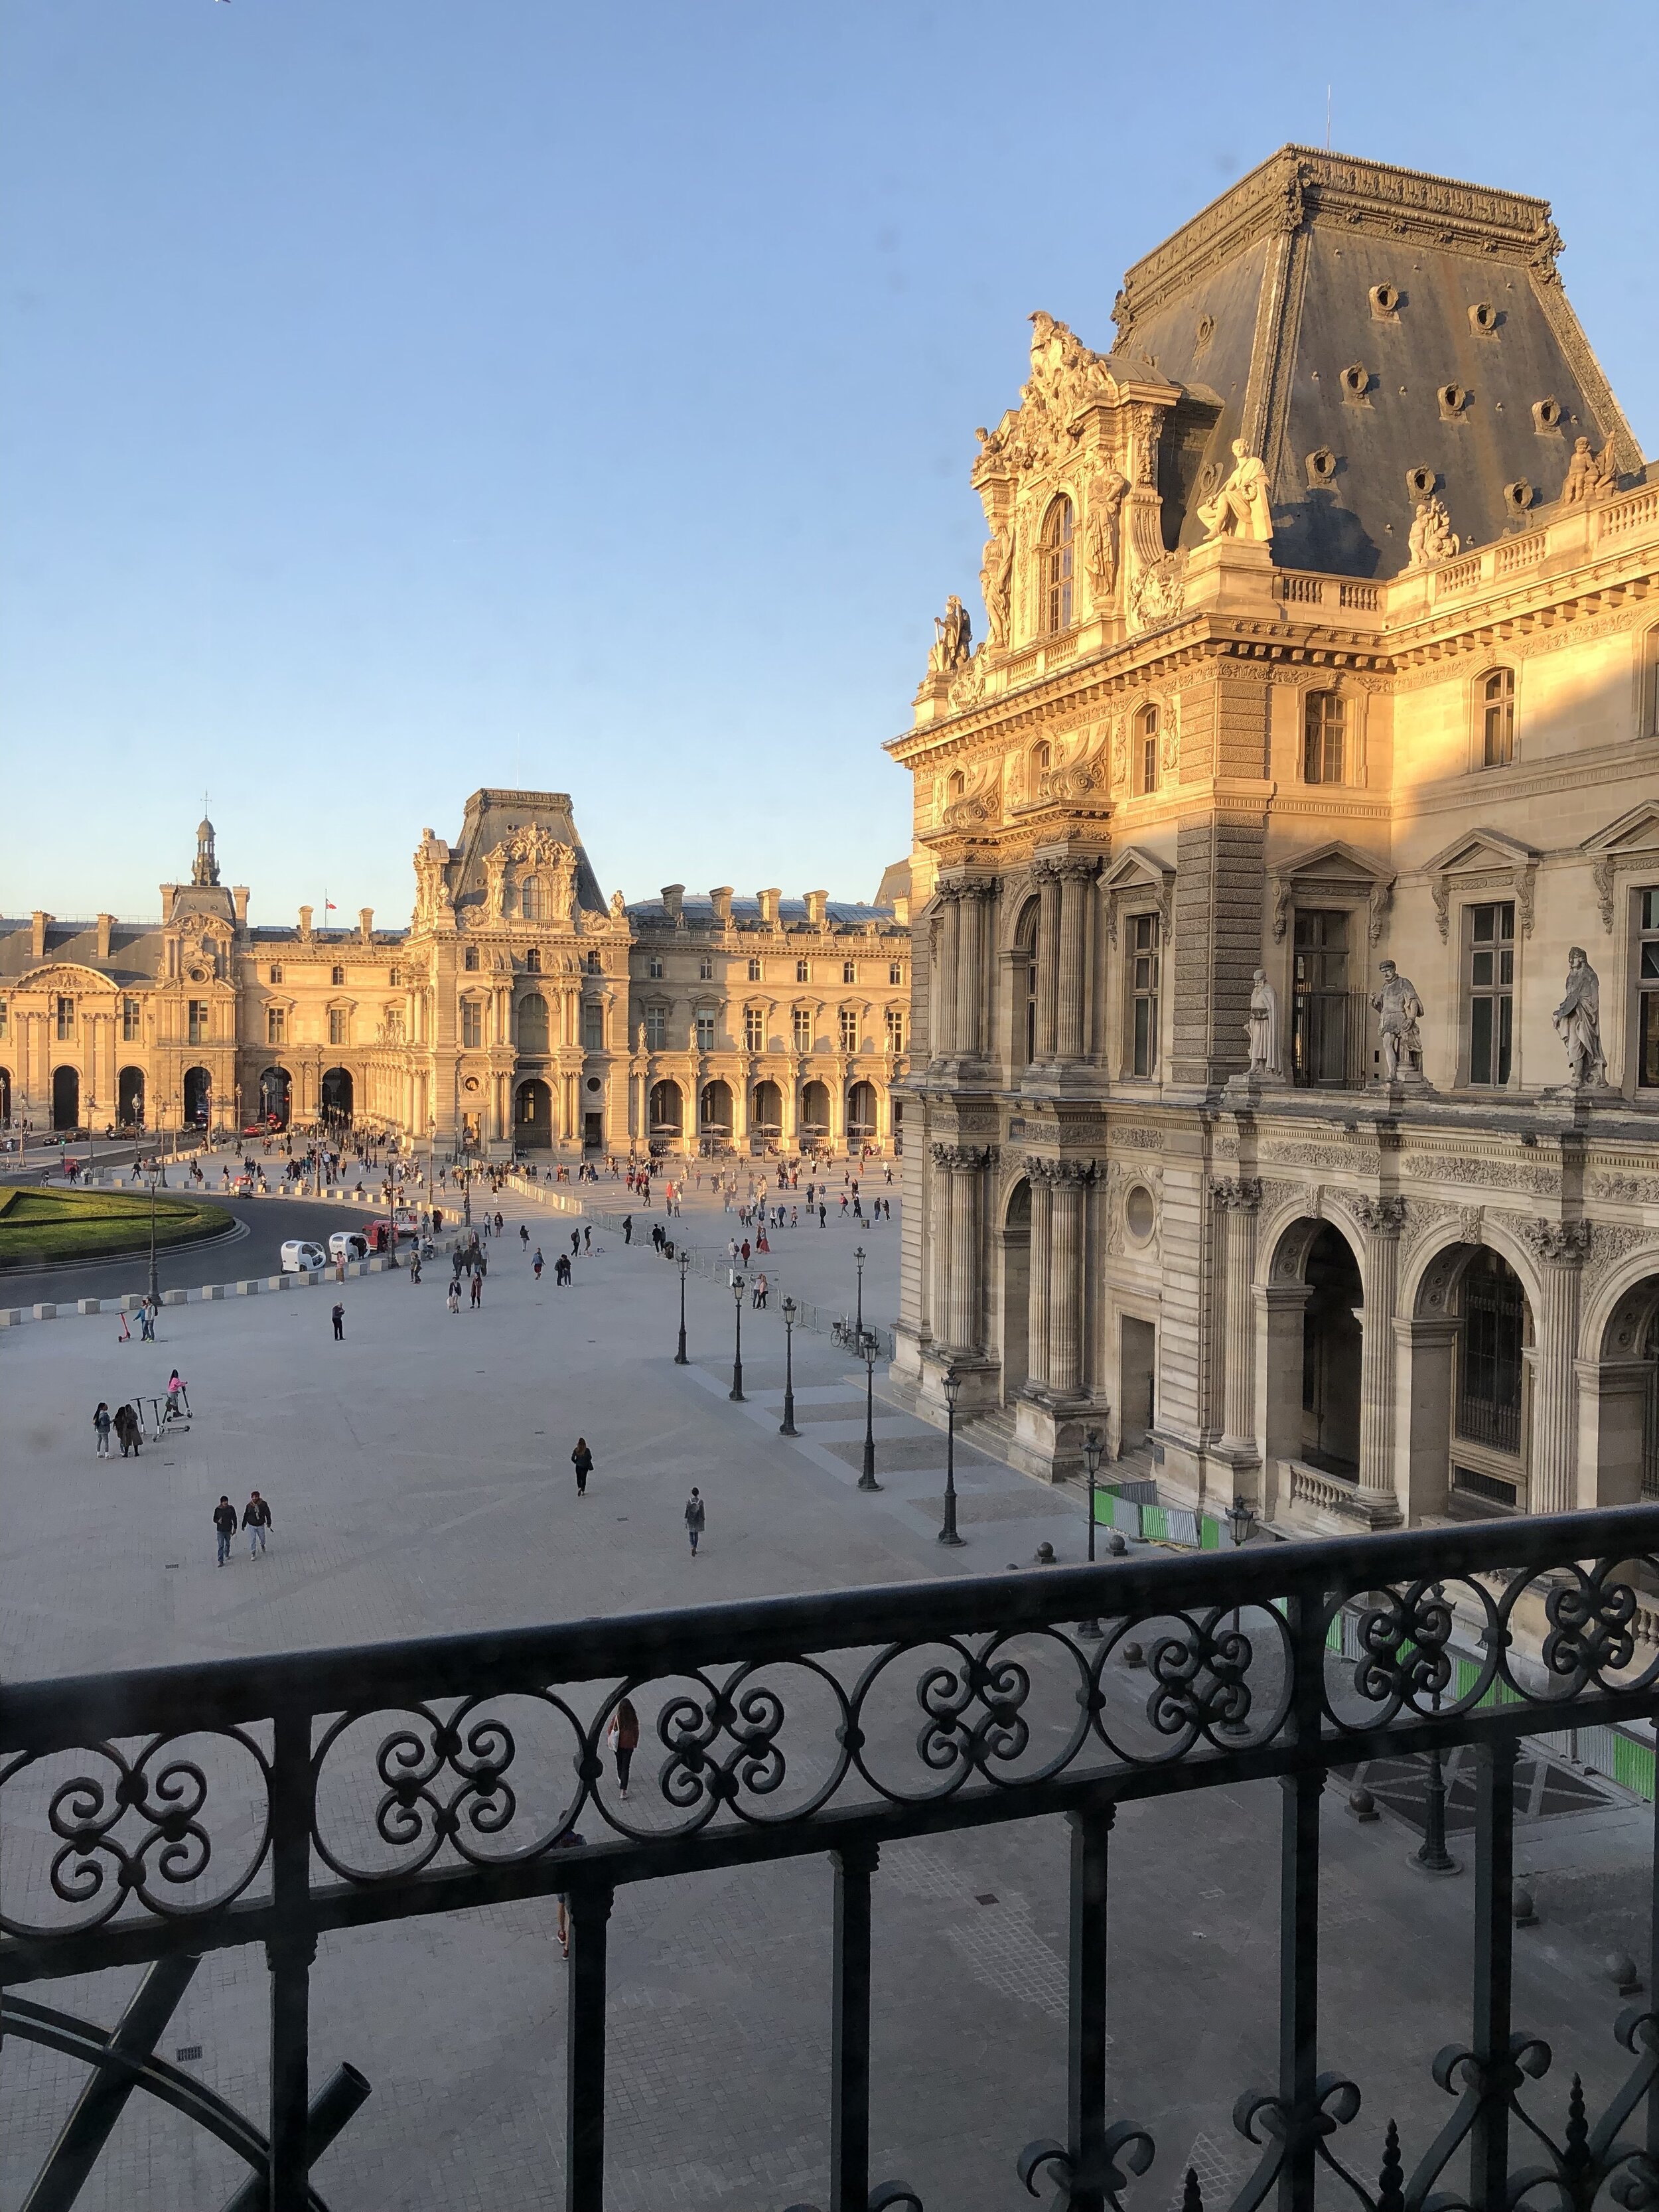 The sun setting on the Louvre